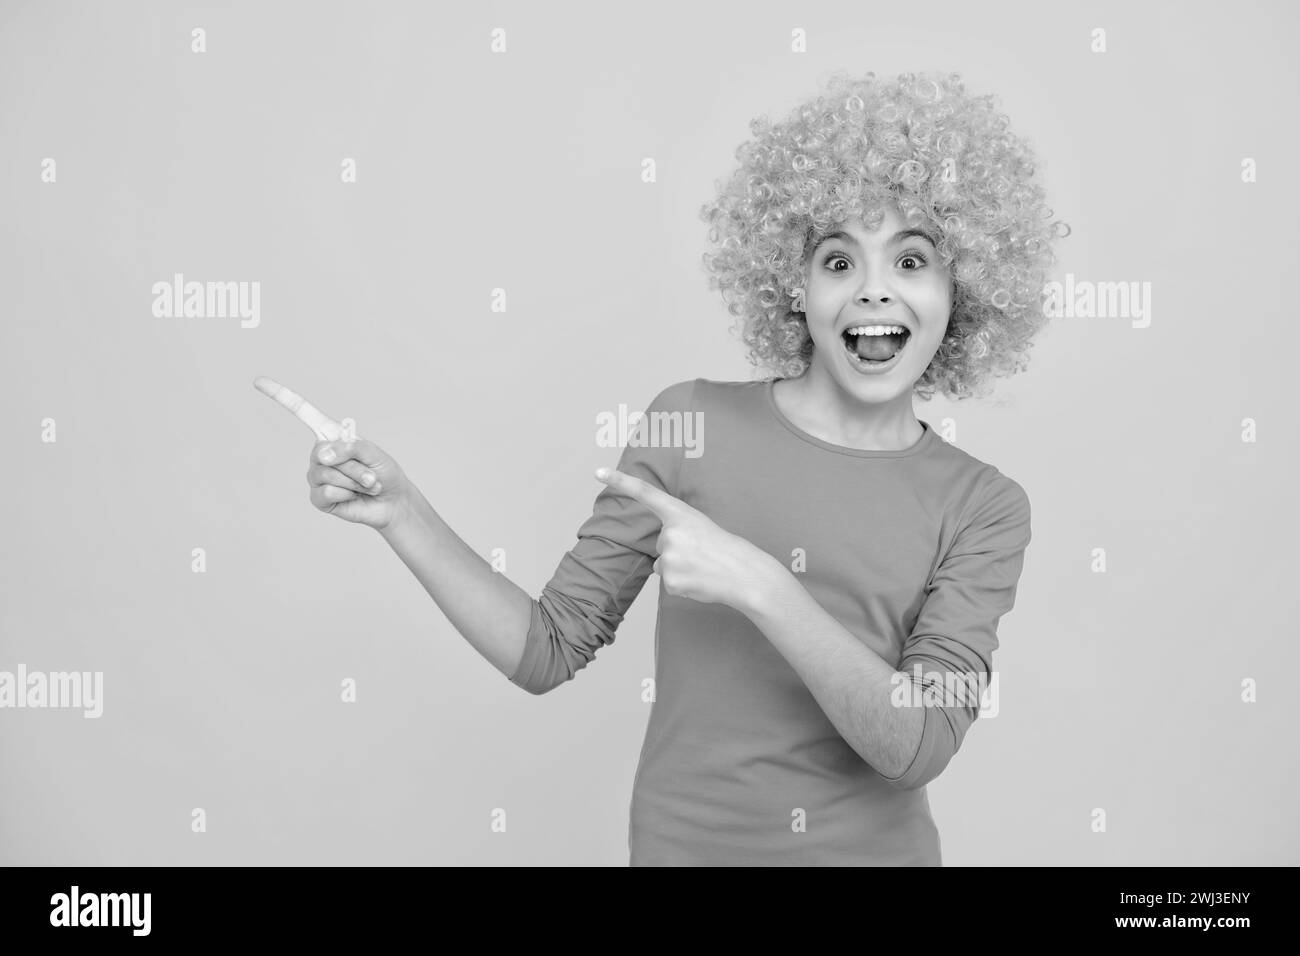 Girl with yellow wig. Funny child wearing orange curly wig hair, summer fun. Excited teenager, glad amazed and overjoyed emotions. Stock Photo